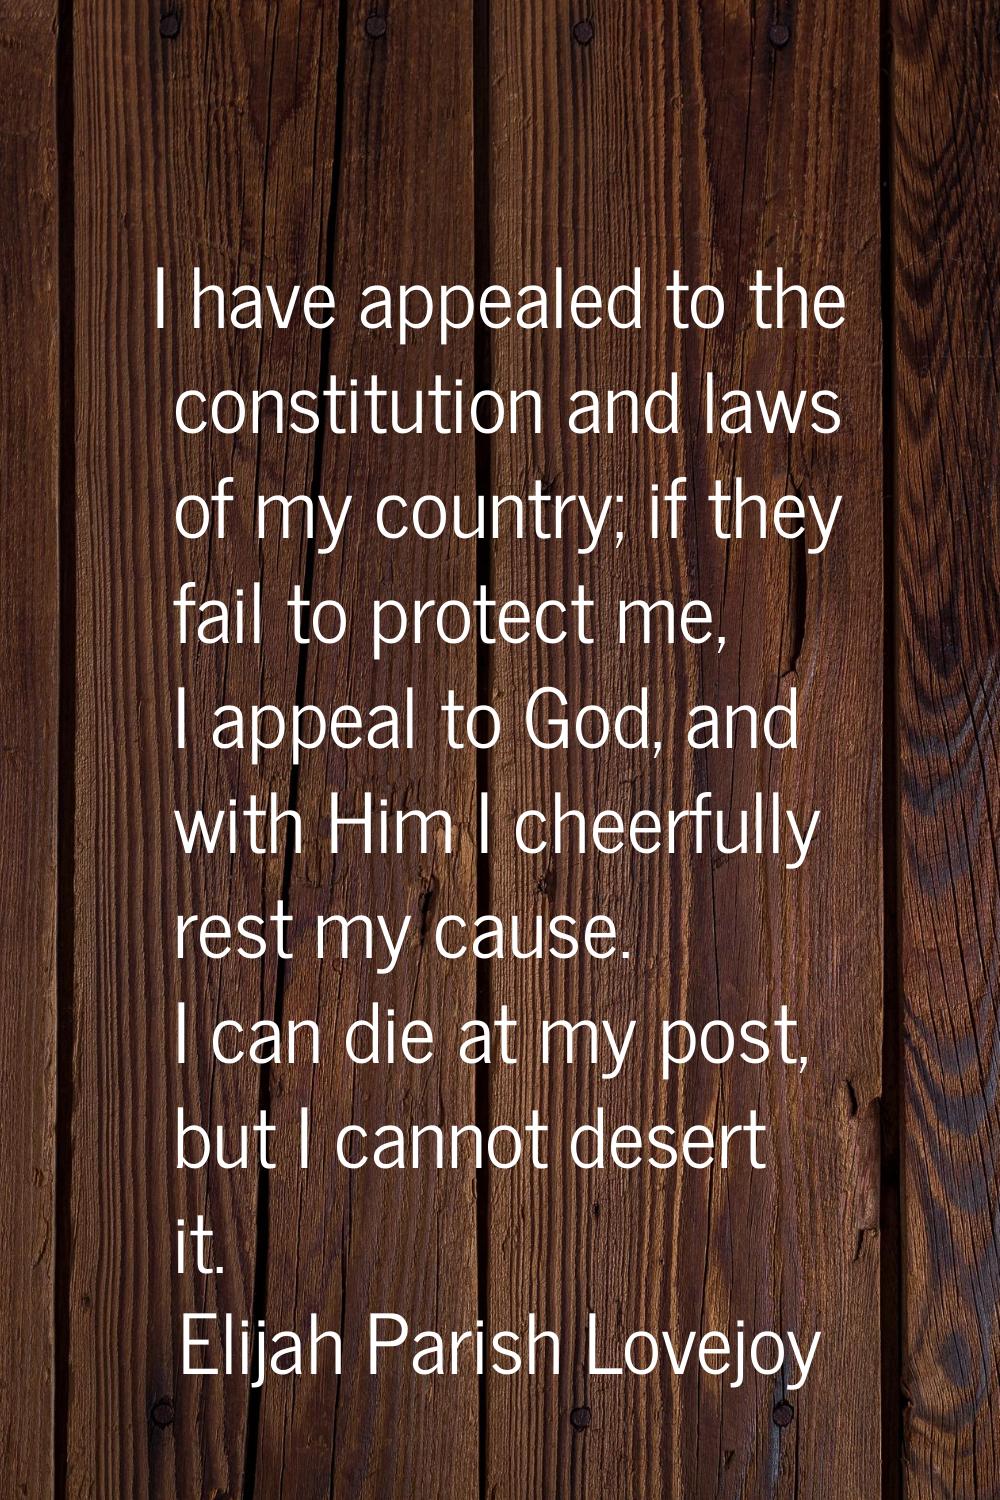 I have appealed to the constitution and laws of my country; if they fail to protect me, I appeal to